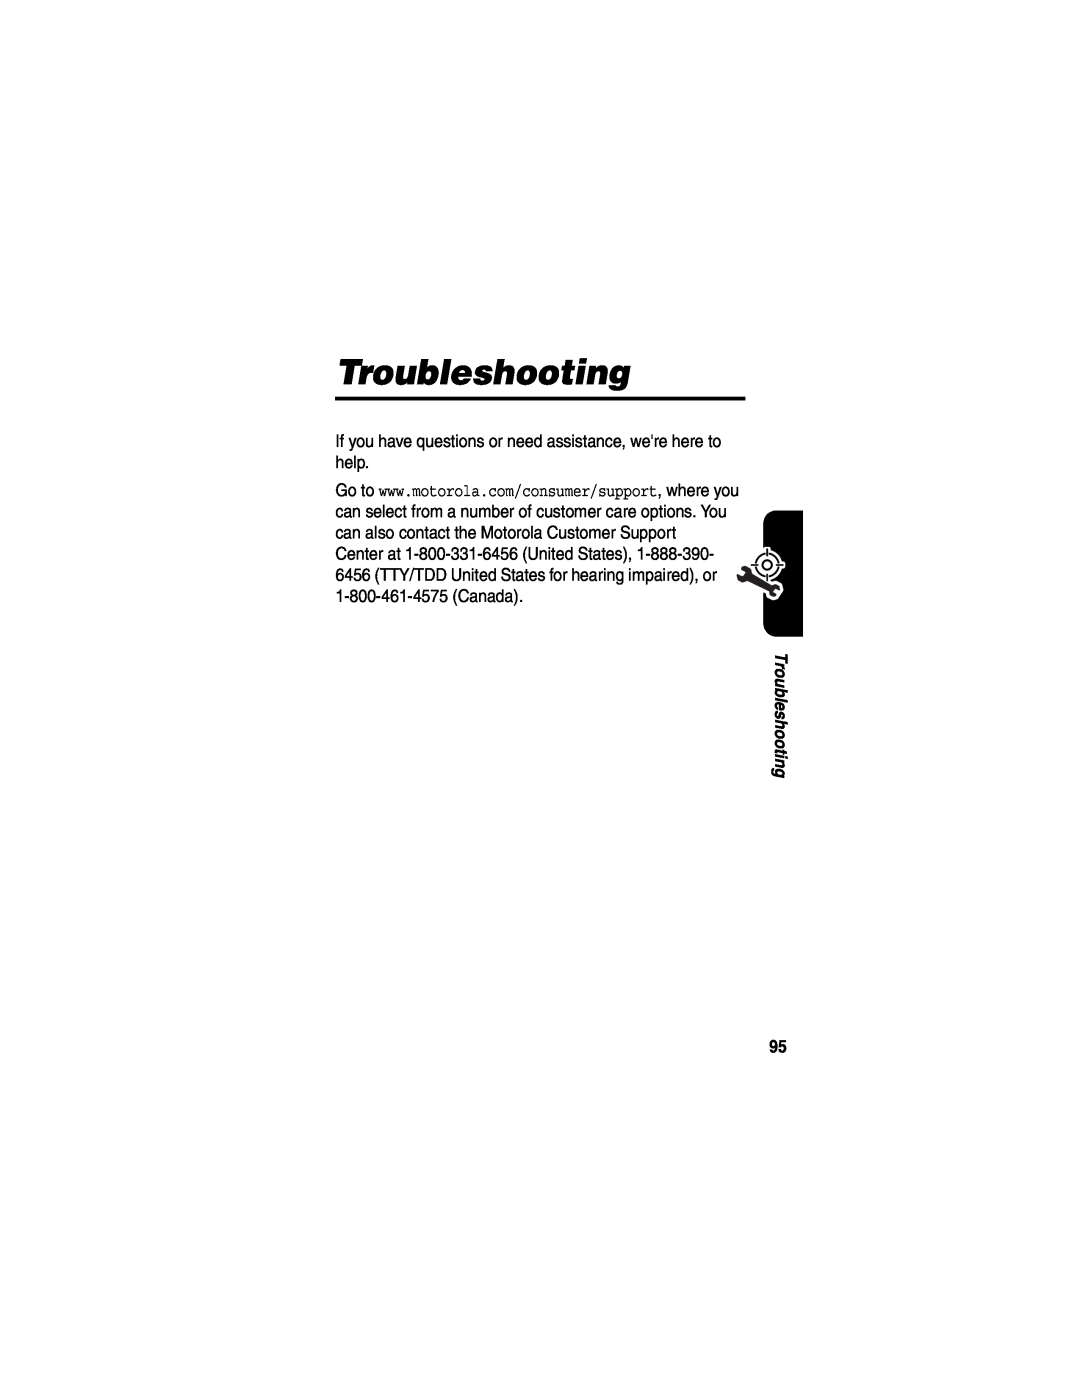 Motorola V635 manual Troubleshooting, If you have questions or need assistance, were here to help 